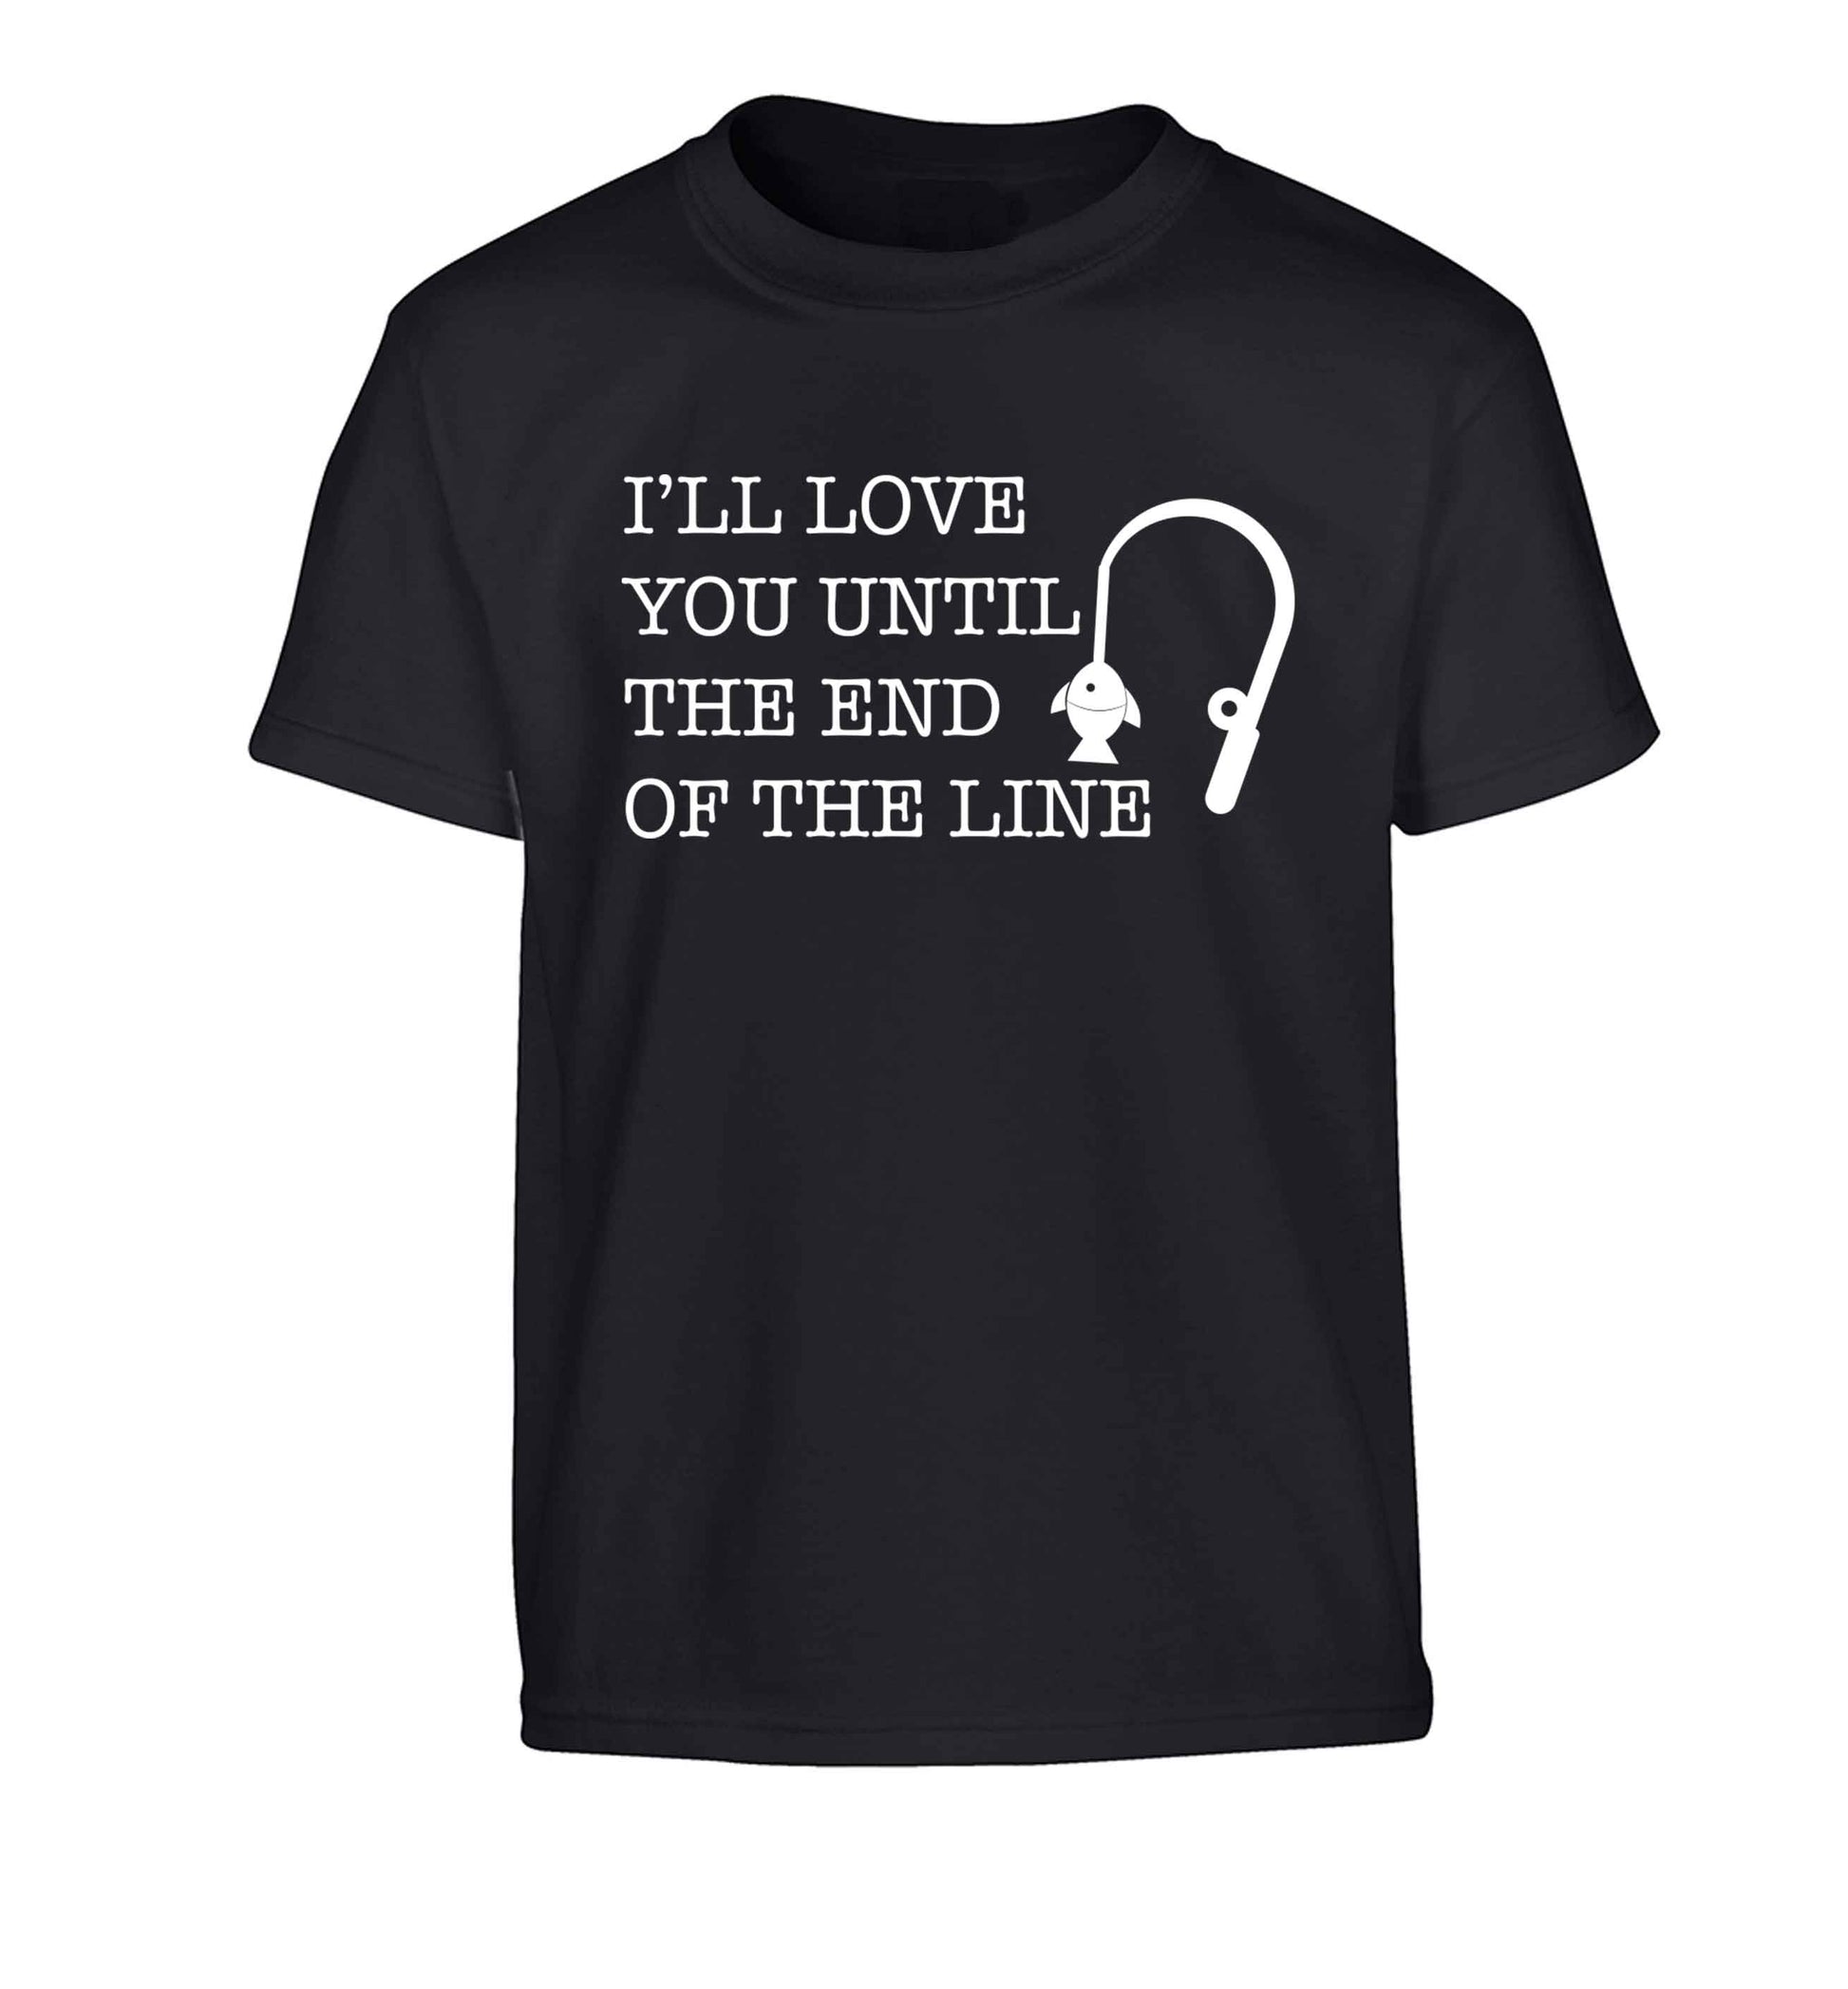 I'll love you until the end of the line Children's black Tshirt 12-13 Years